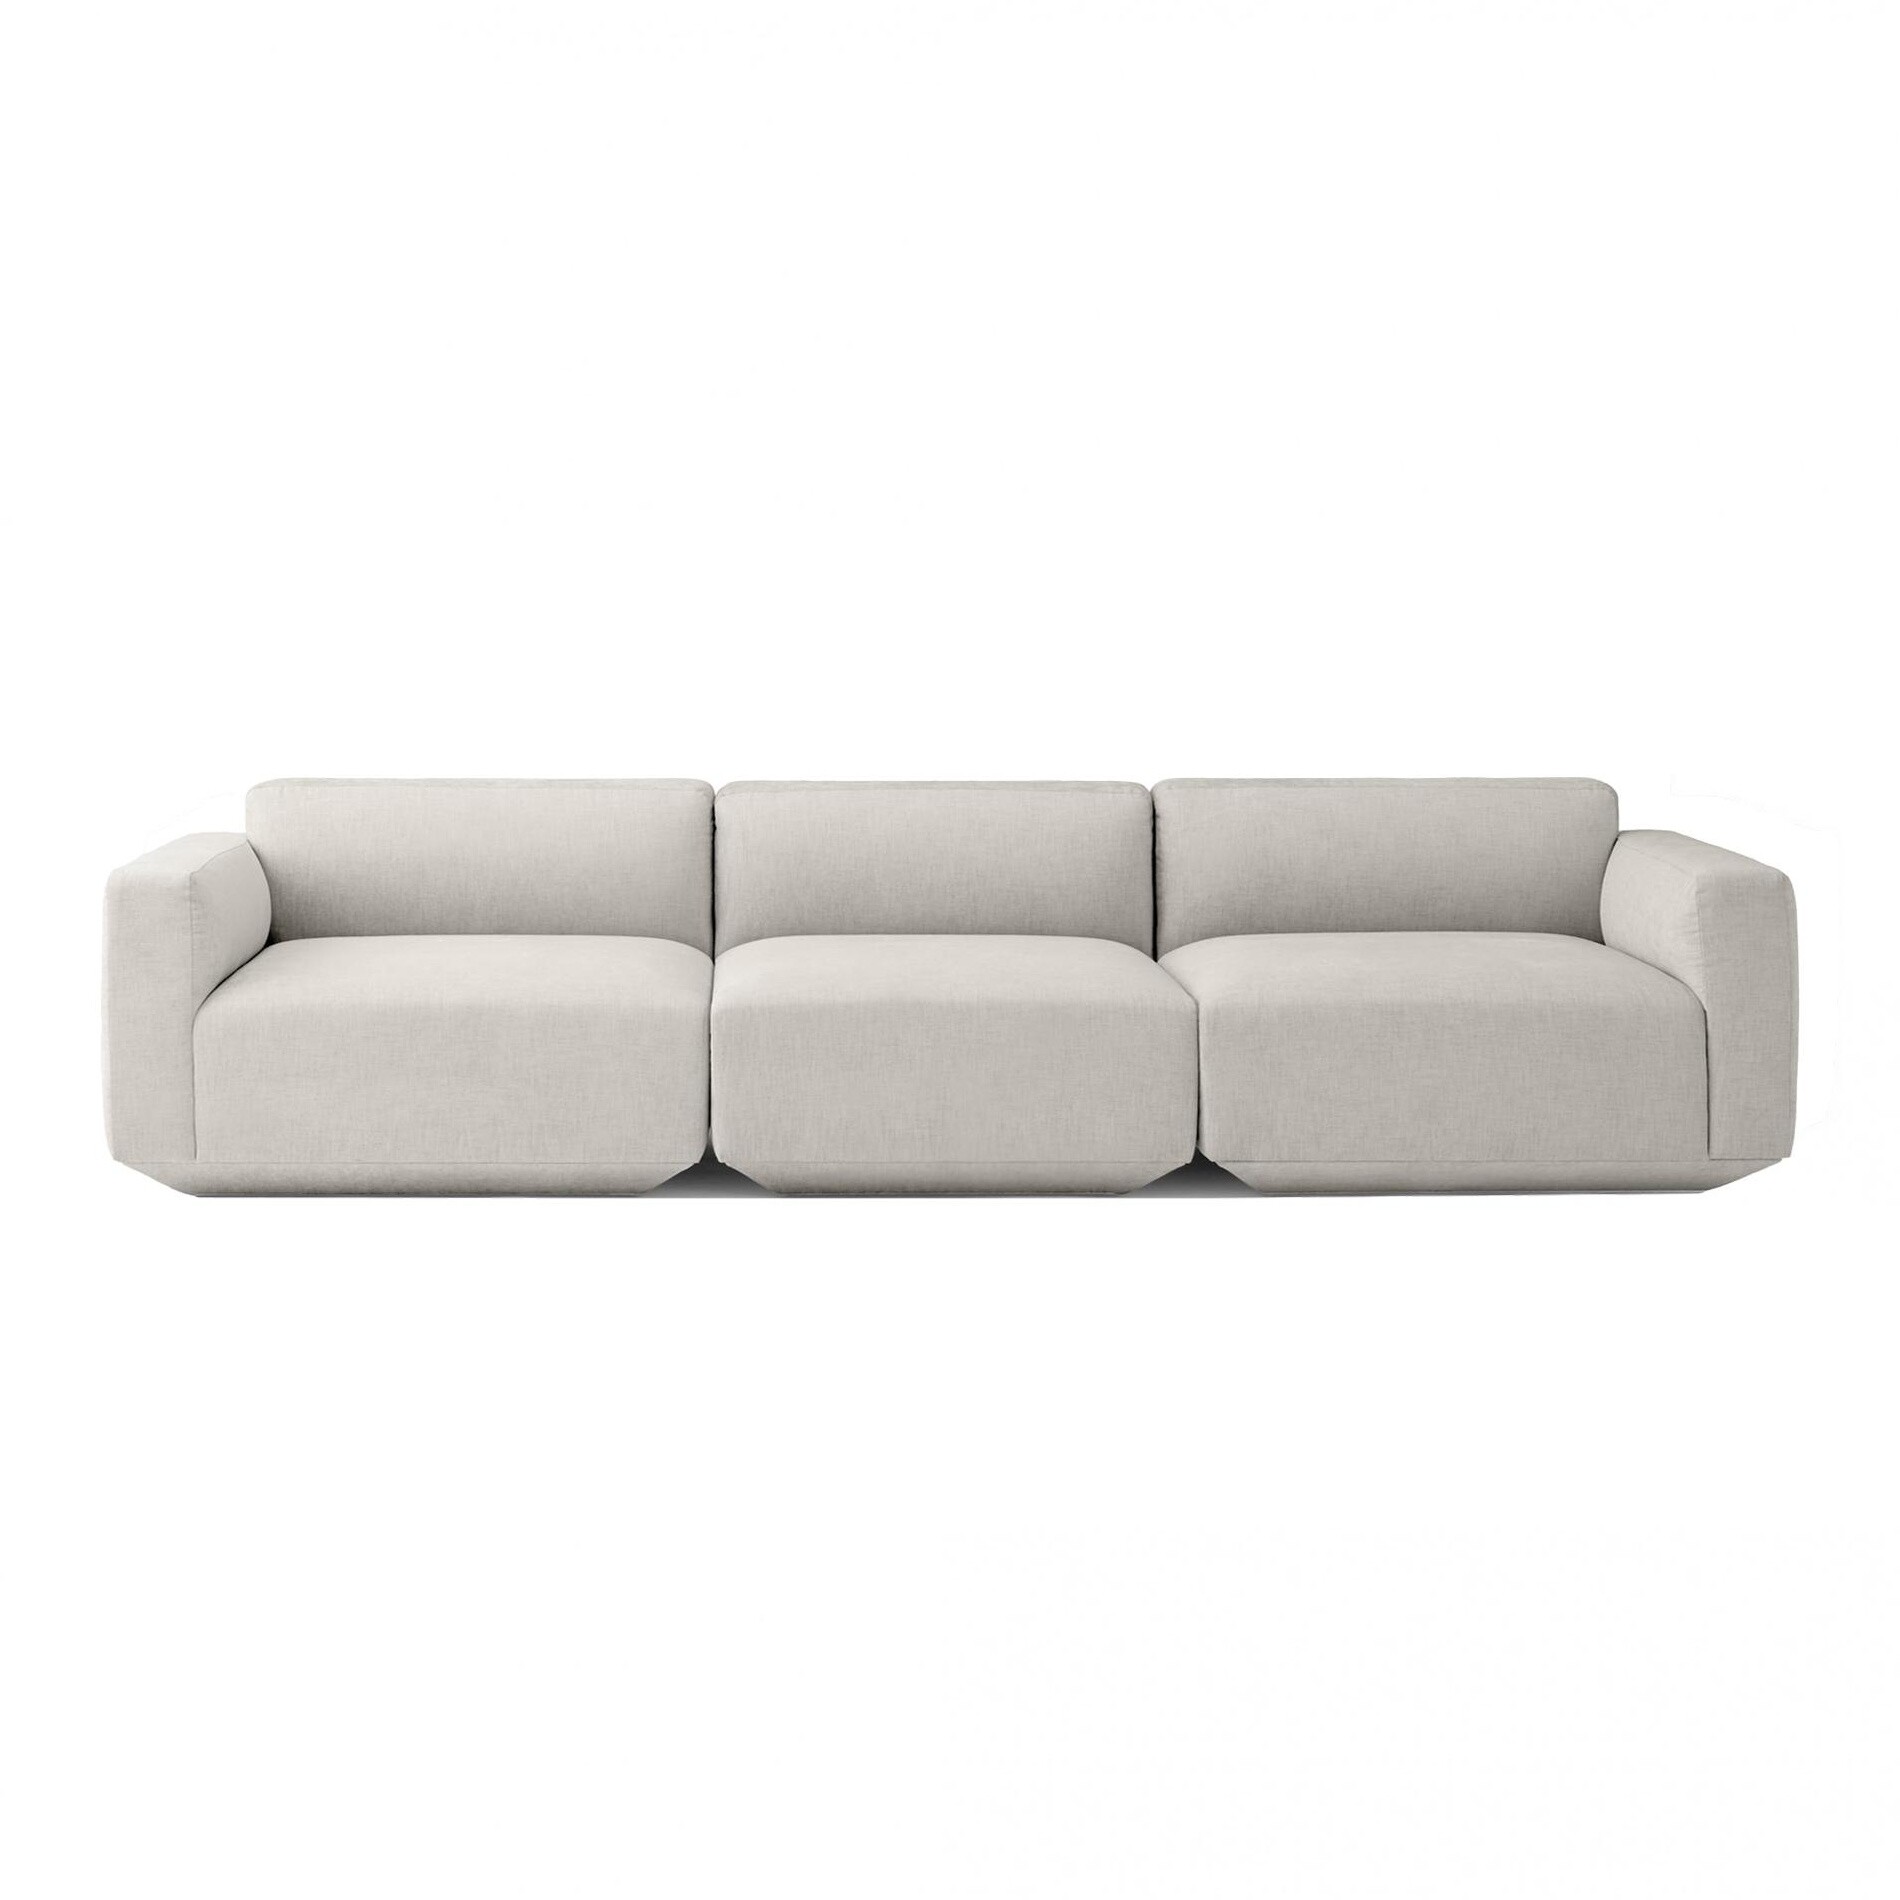 Tradition Develius 3 Seater Sofa, How Much Does A 3 Seater Sofa Weigh